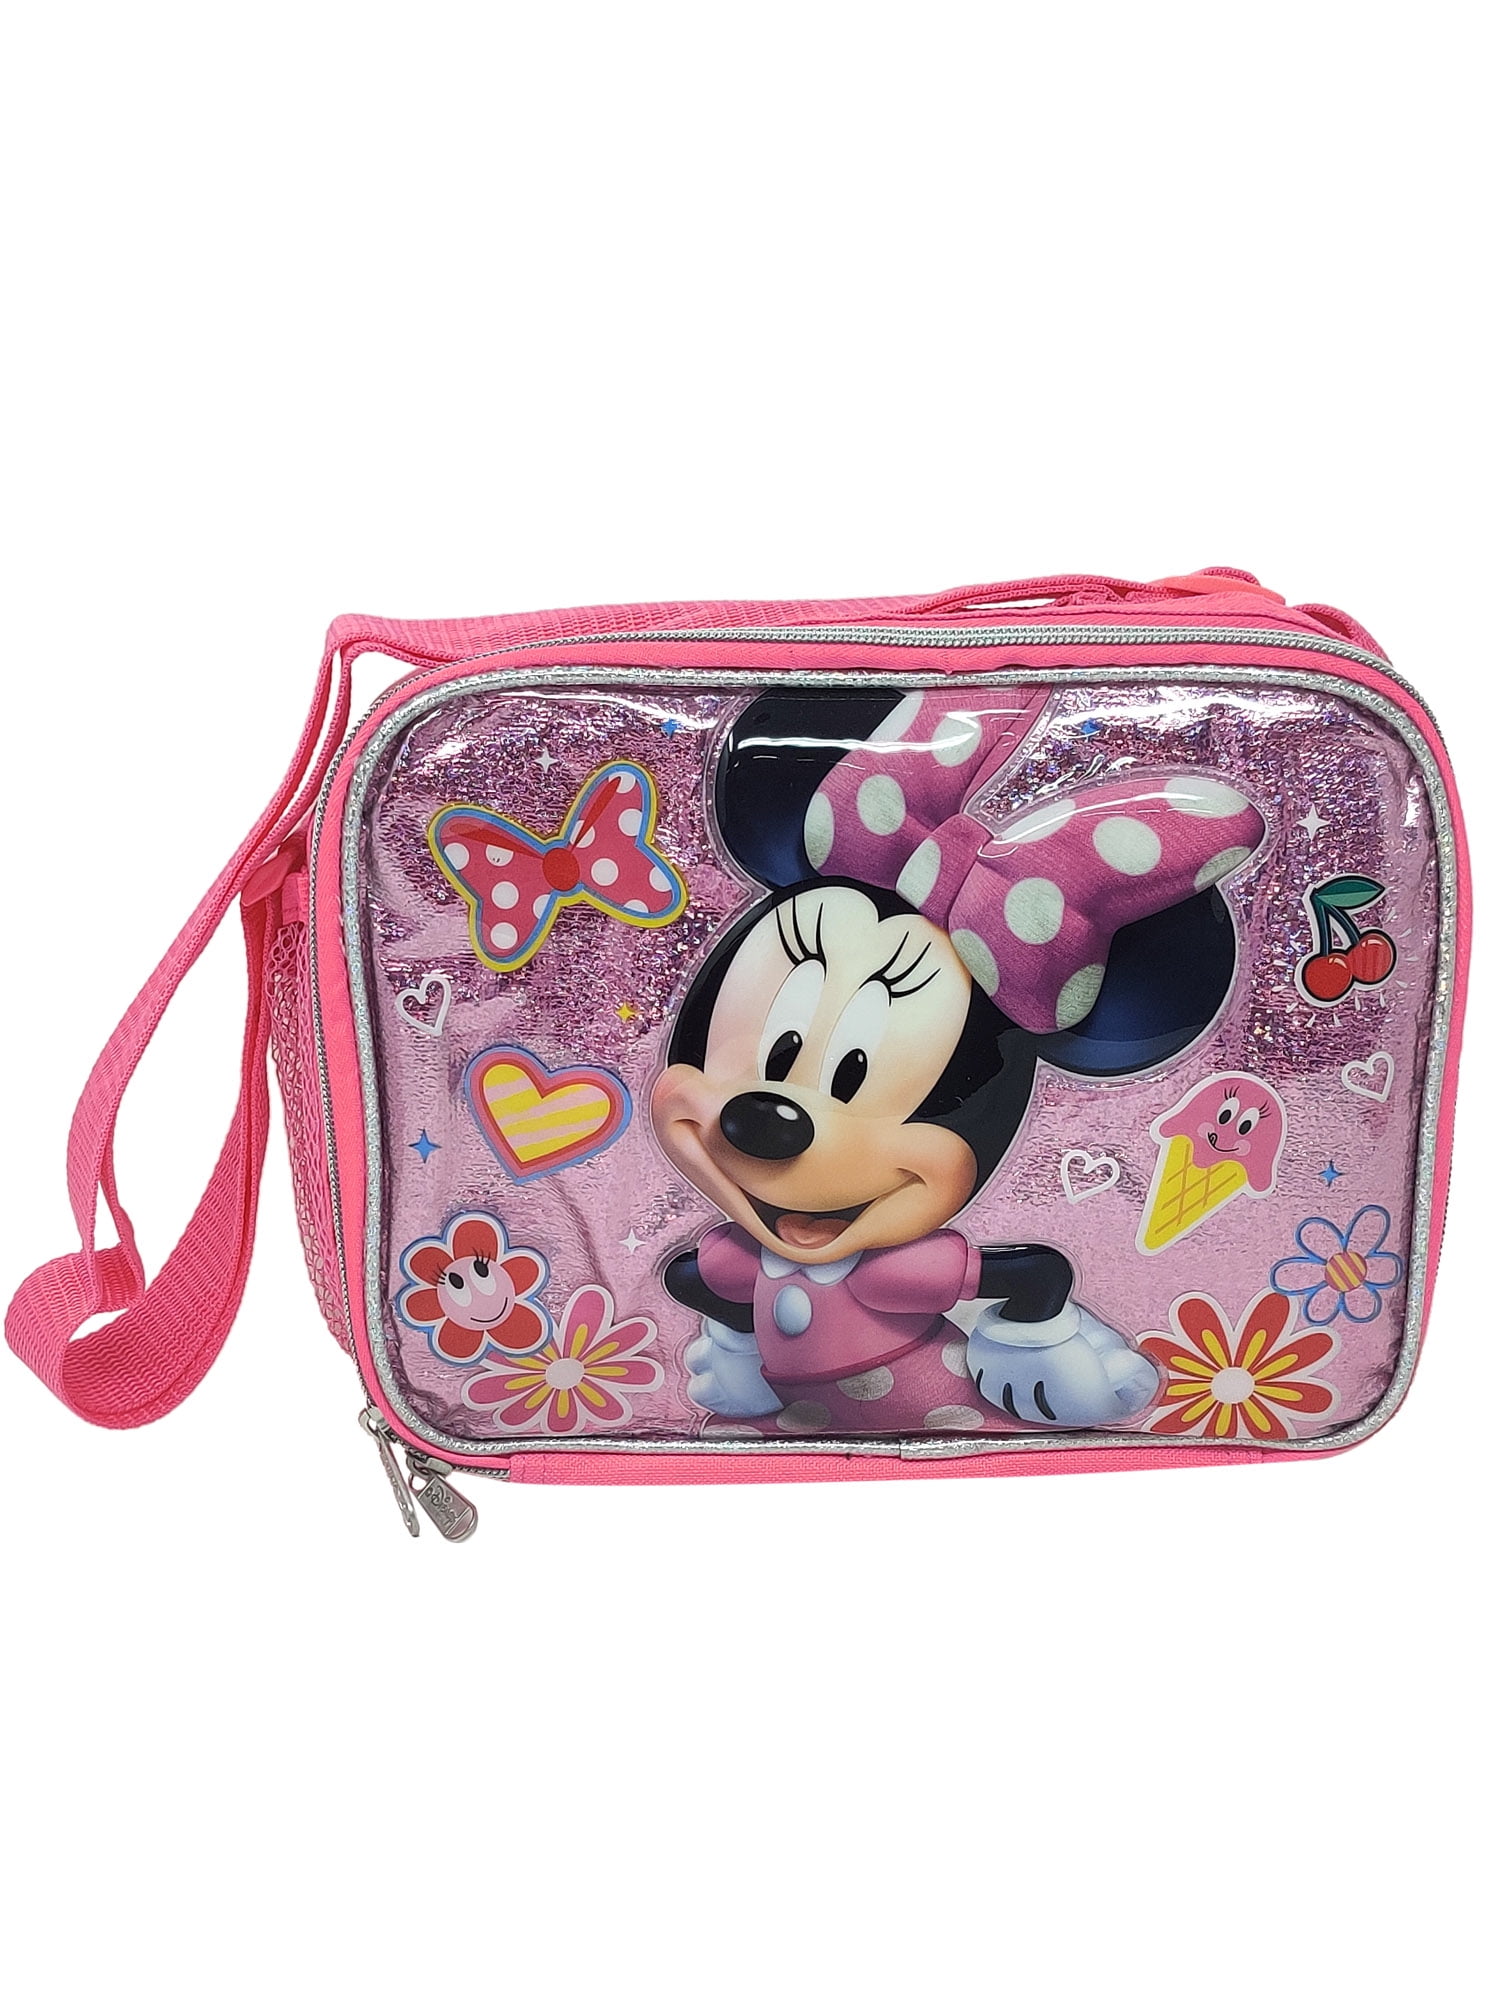 Minnie Mouse Insulated Lunch Bag I love Rainbows w/ Disney Girls Pink Sling Bag 